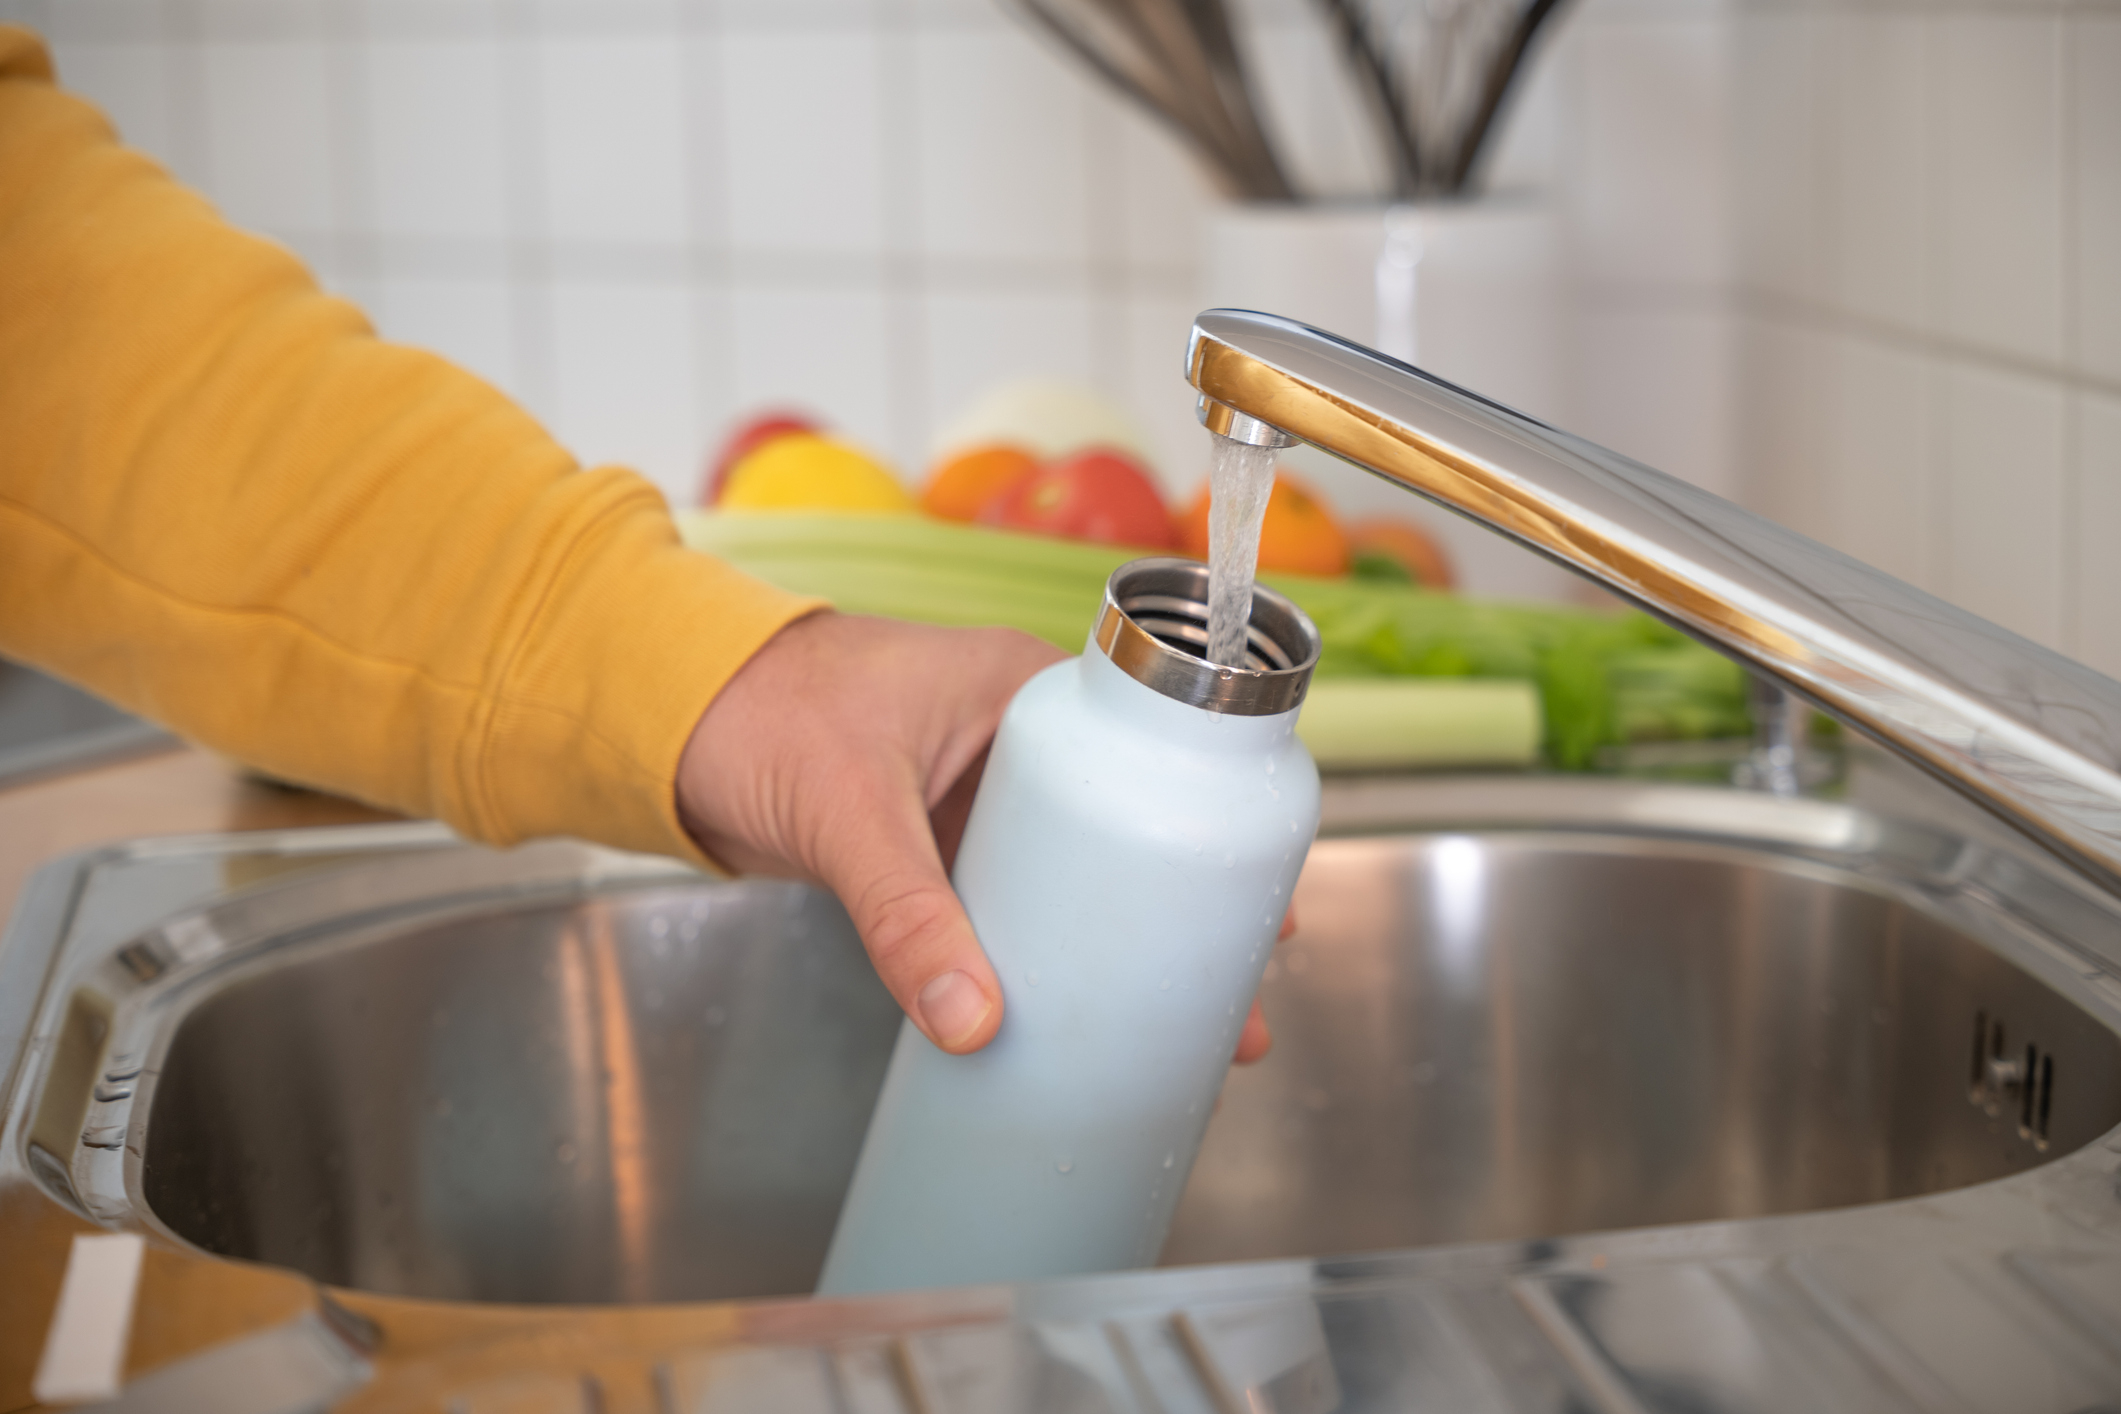 A person in a yellow sleeve fills a reusable water bottle from a kitchen faucet. Fruits and vegetables are in the background